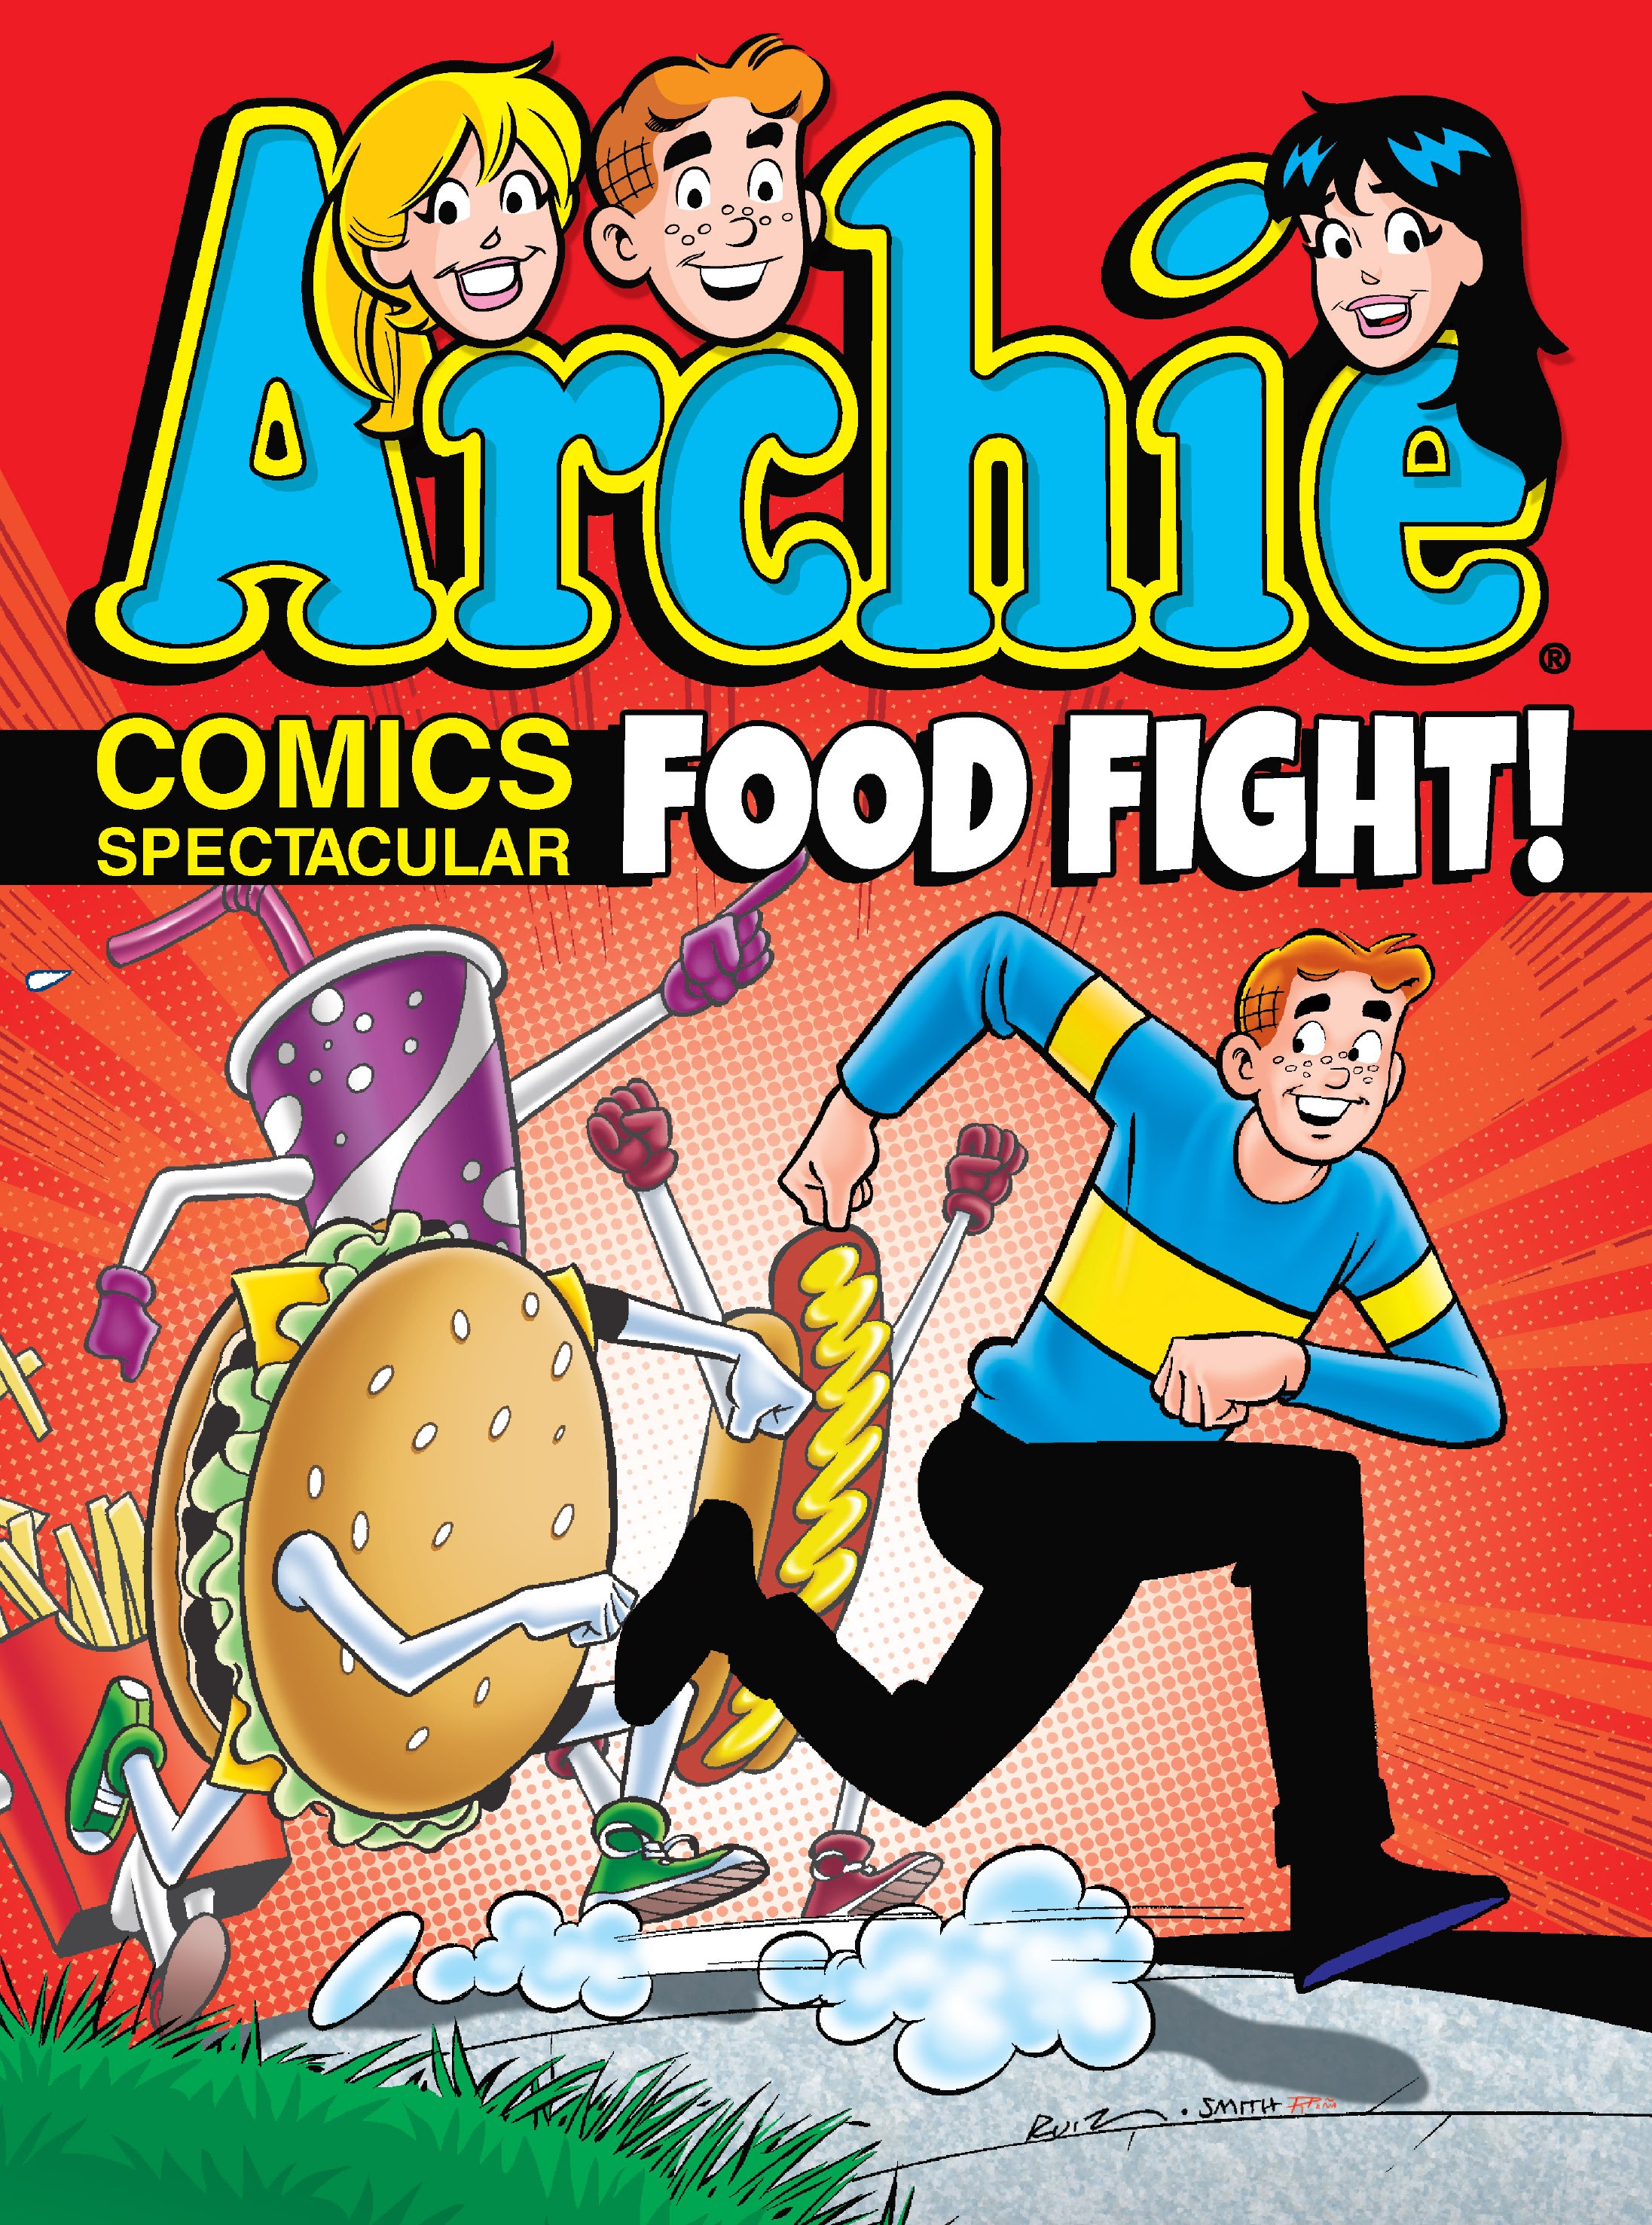 Read online Archie Comics Spectacular: Food Fight comic -  Issue # TPB - 1